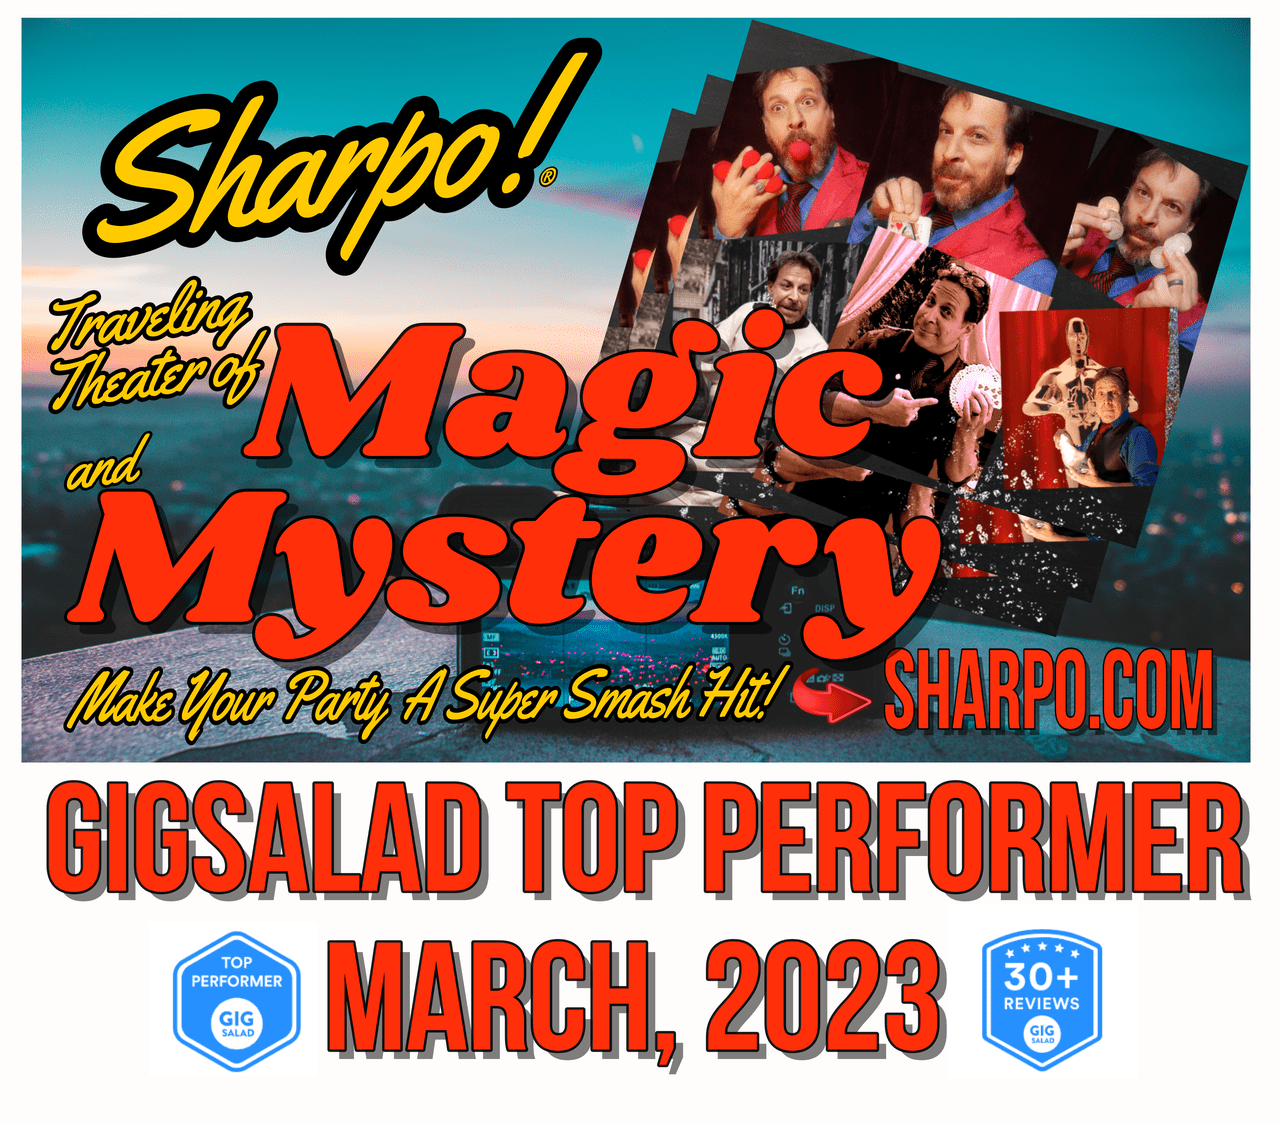 Sharpo is again named a top performer on gigsalad March 2023.